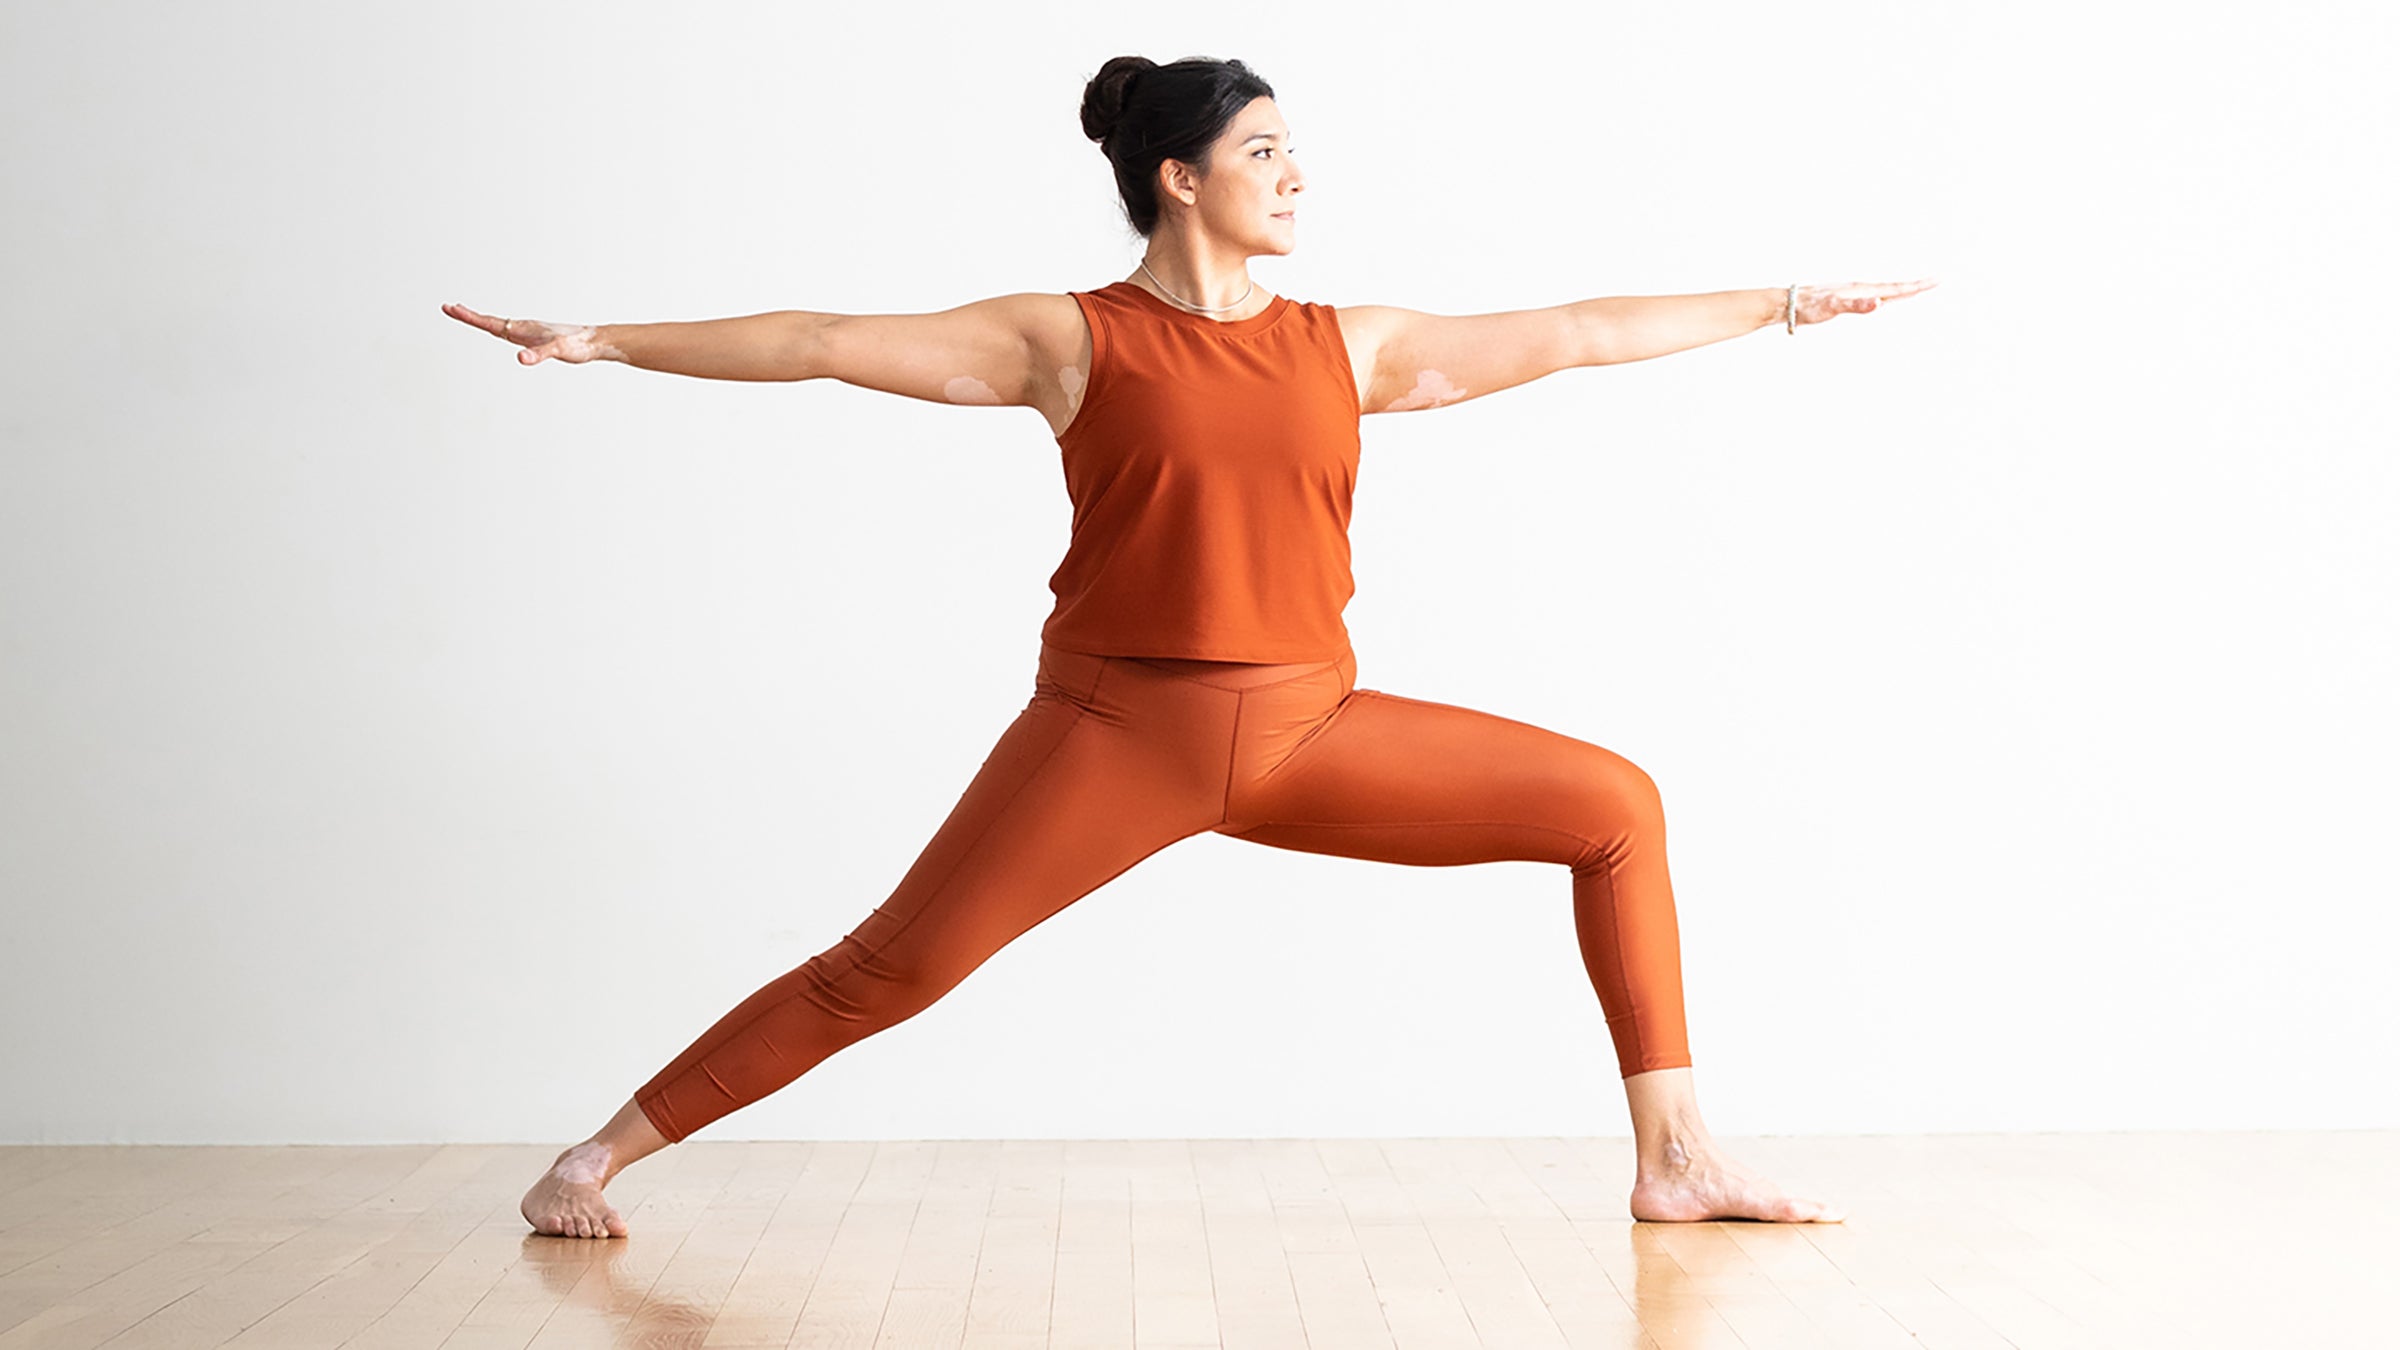 These 5 Standing Yoga Poses for Core Strength Take Only 15 Minutes